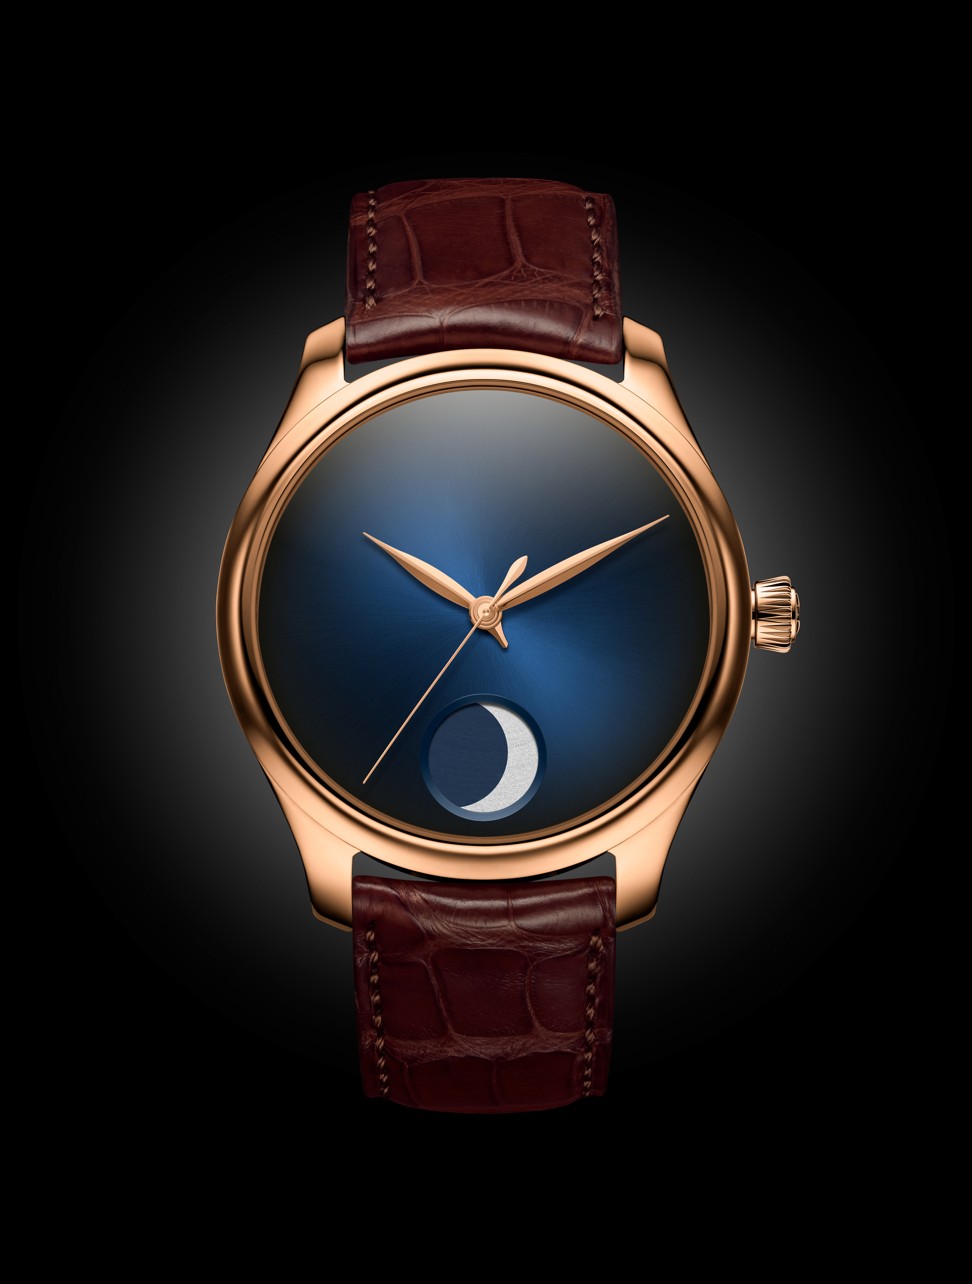 H. Moser Endeavour Perpetual Moon Concept – the red gold version